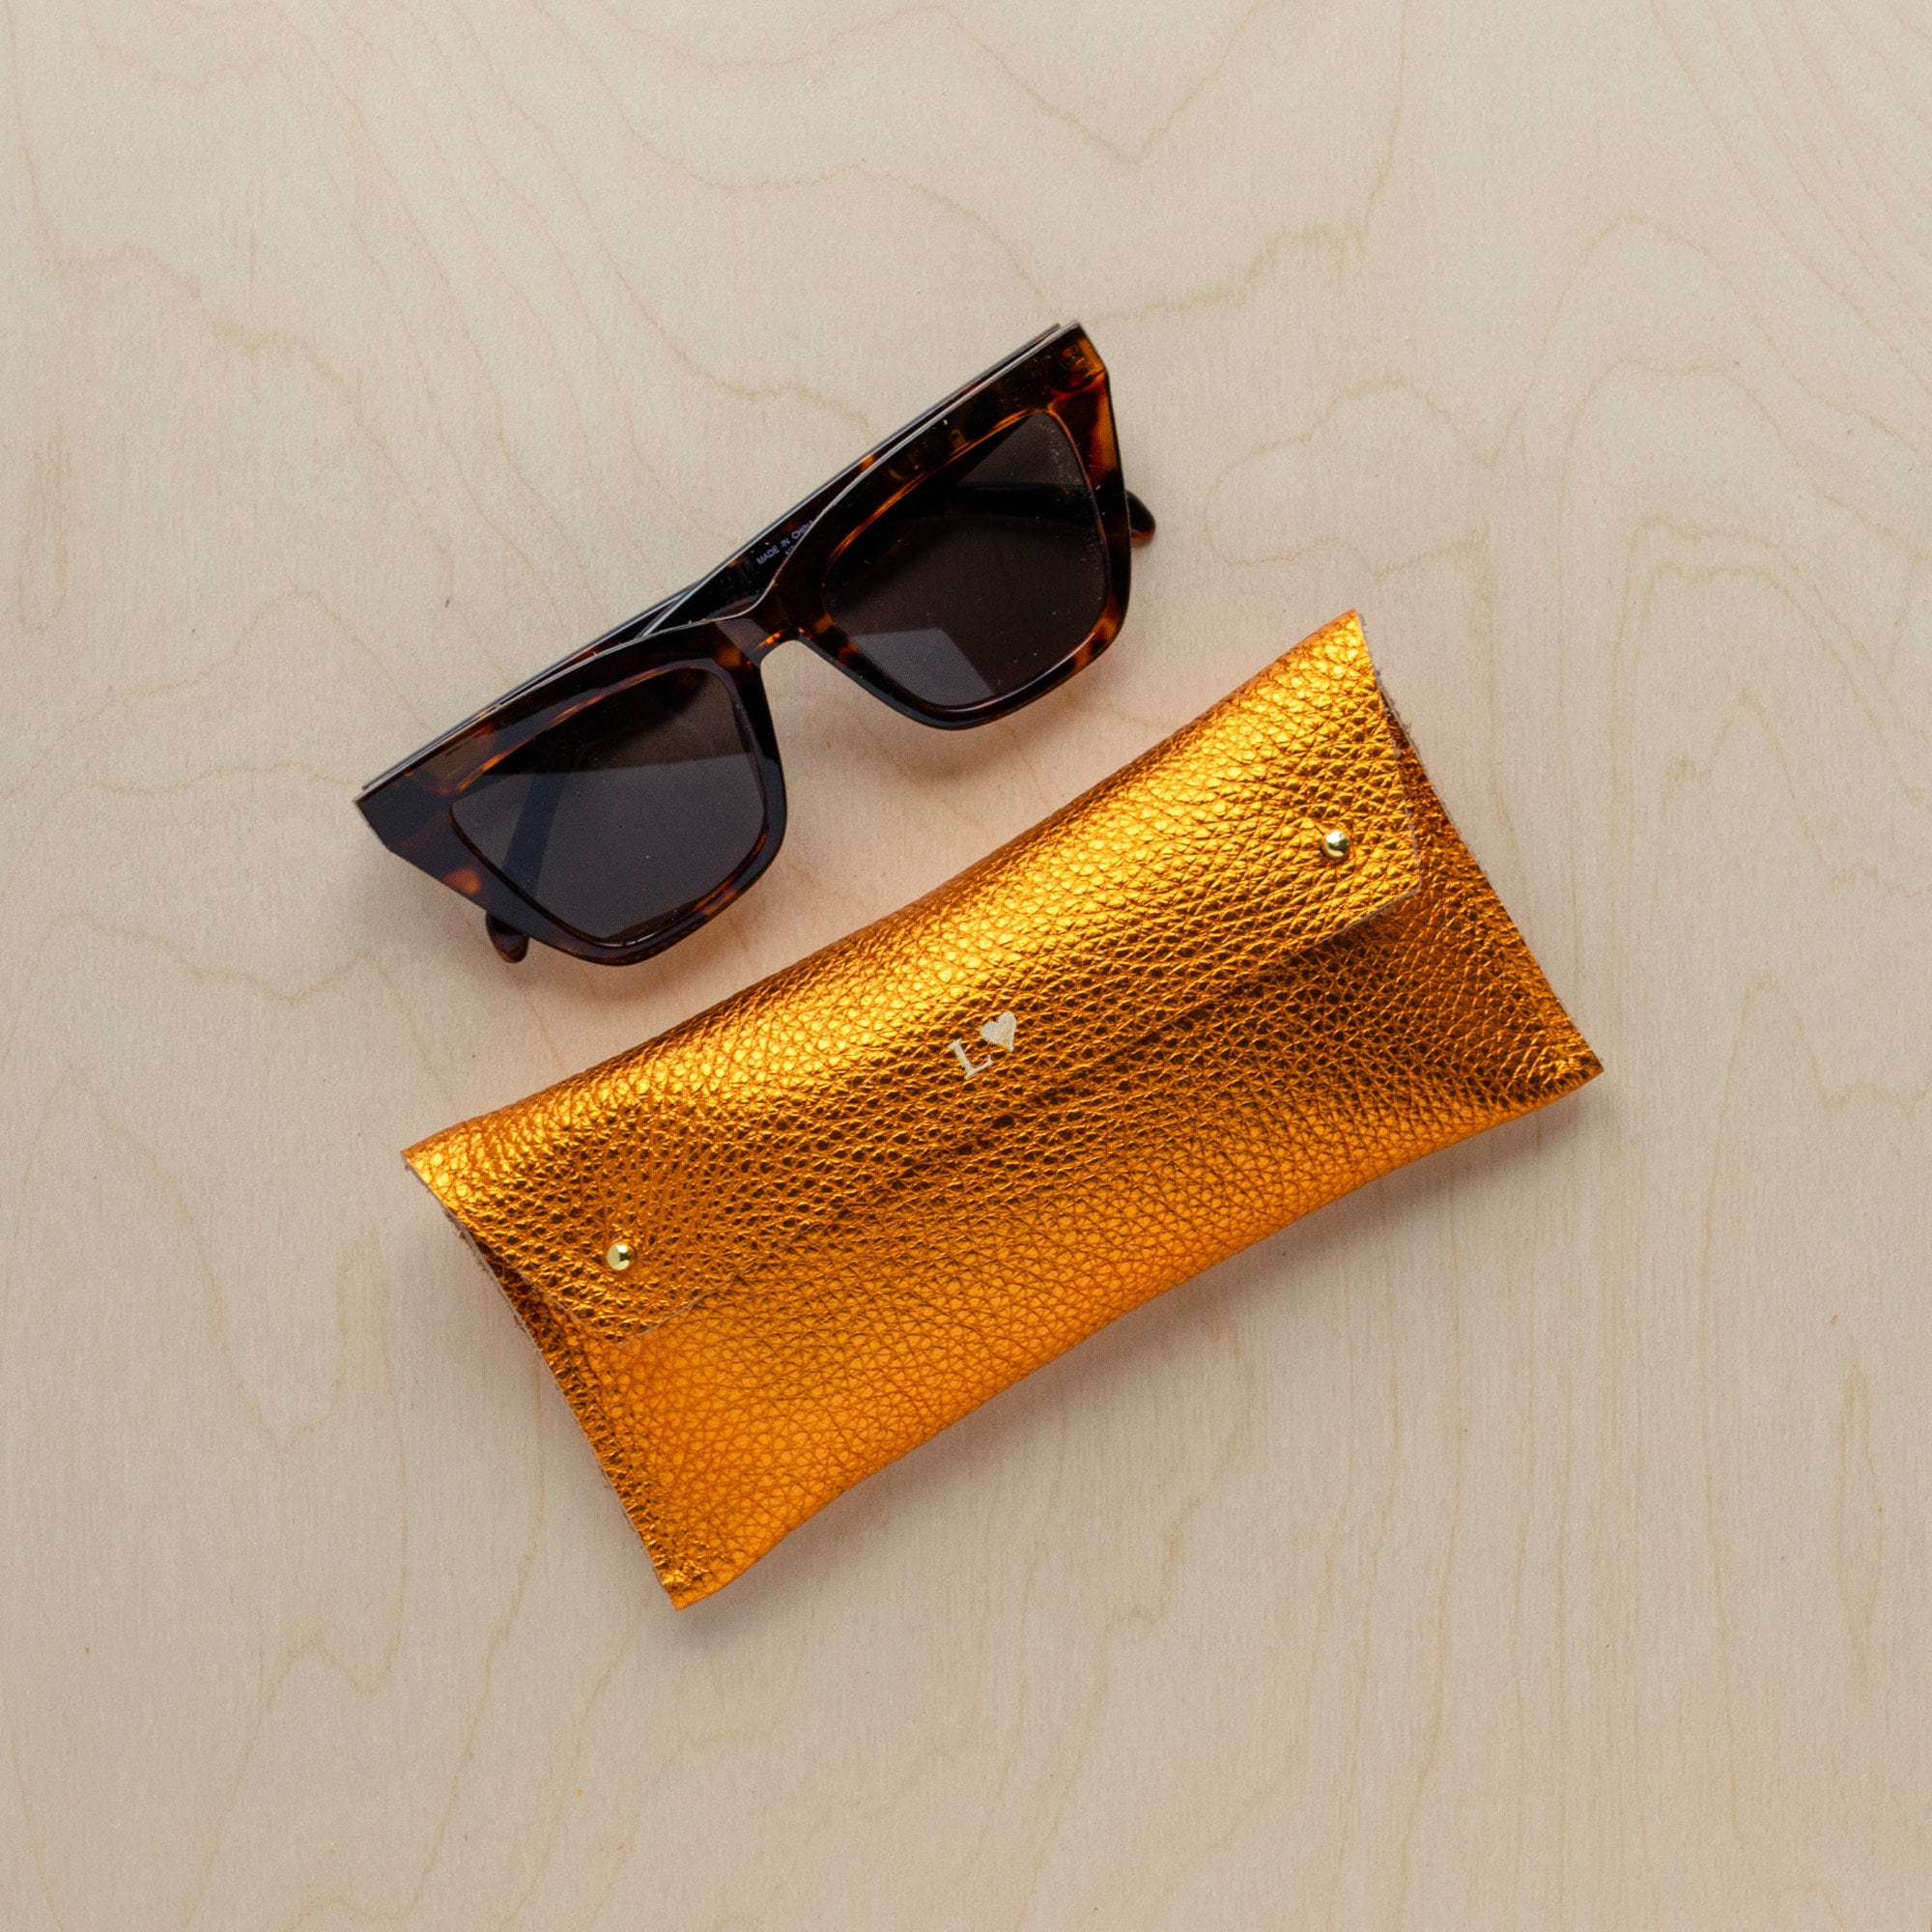 Metallic Rust Orange Leather Glasses Case, Copper Eyeglasses Pencil Case Or Leather Wallet. Personalised Gift